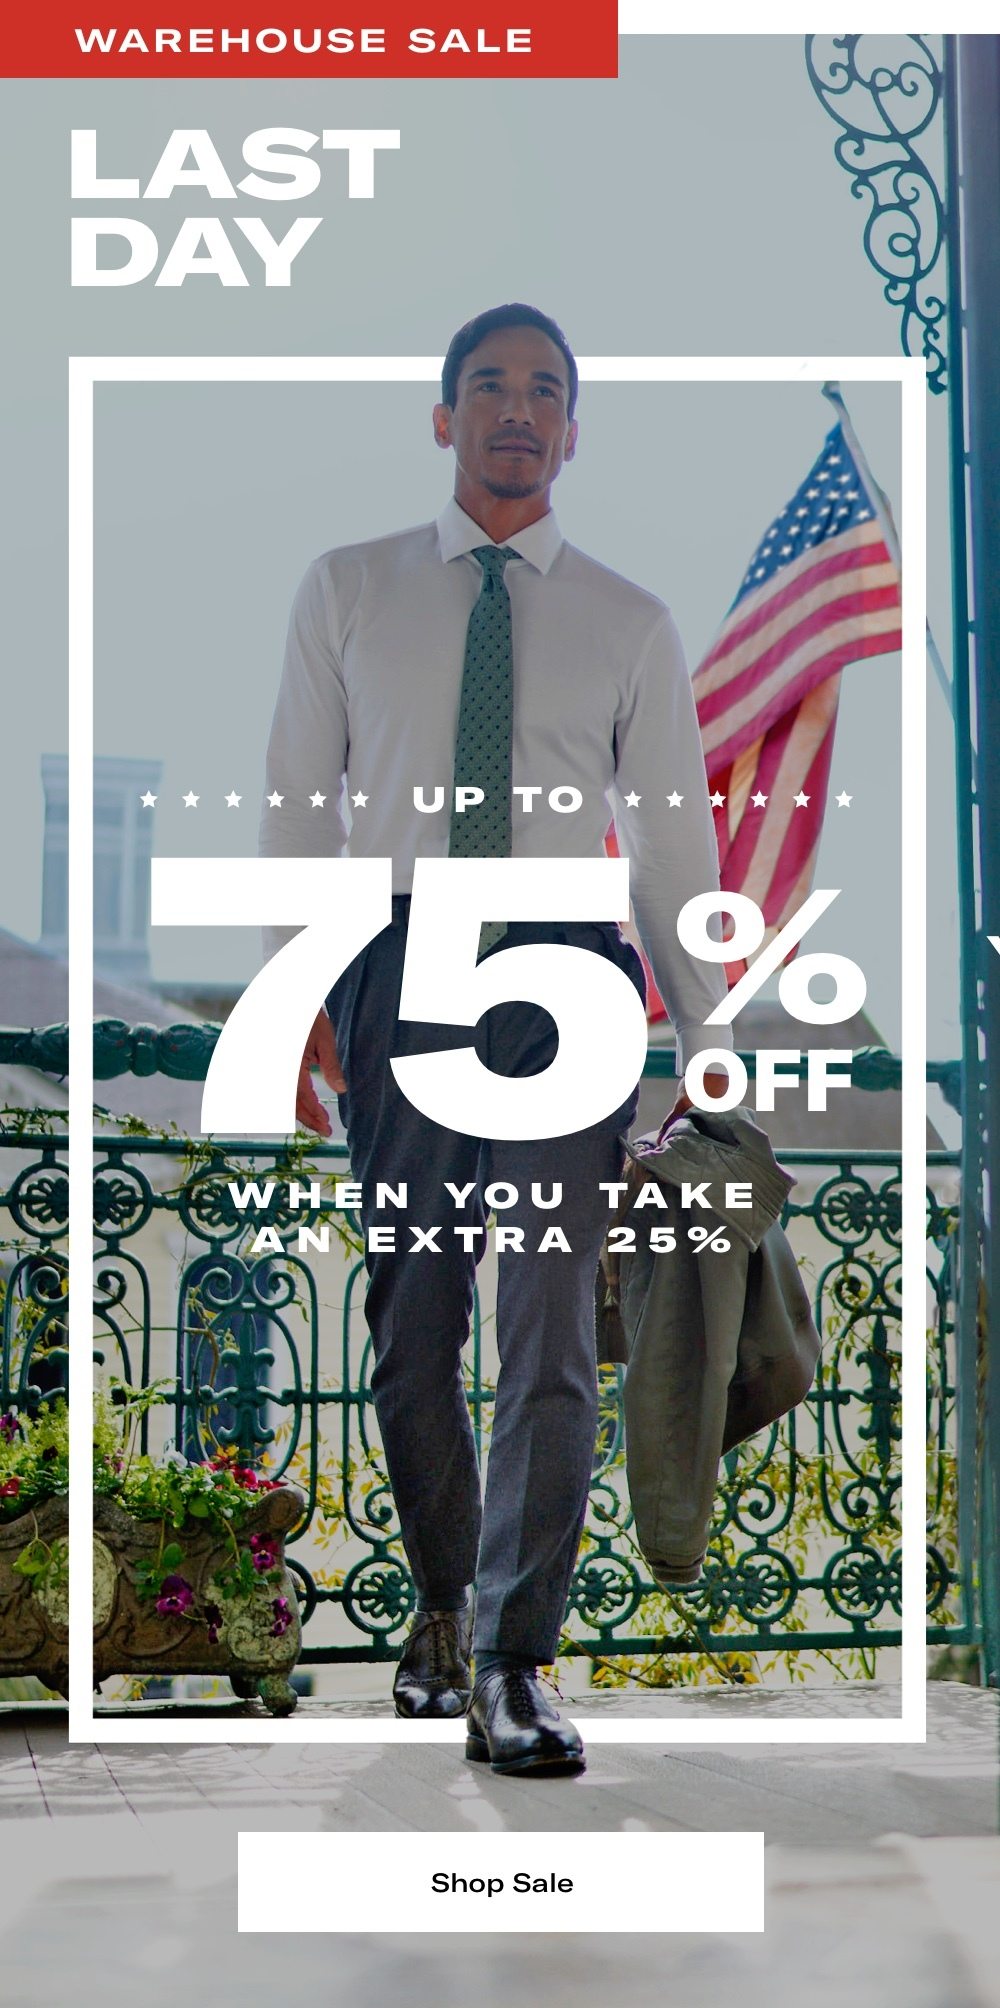 Last Day for Warehouse Sale - Save Up To 75% when you take an extra 25%